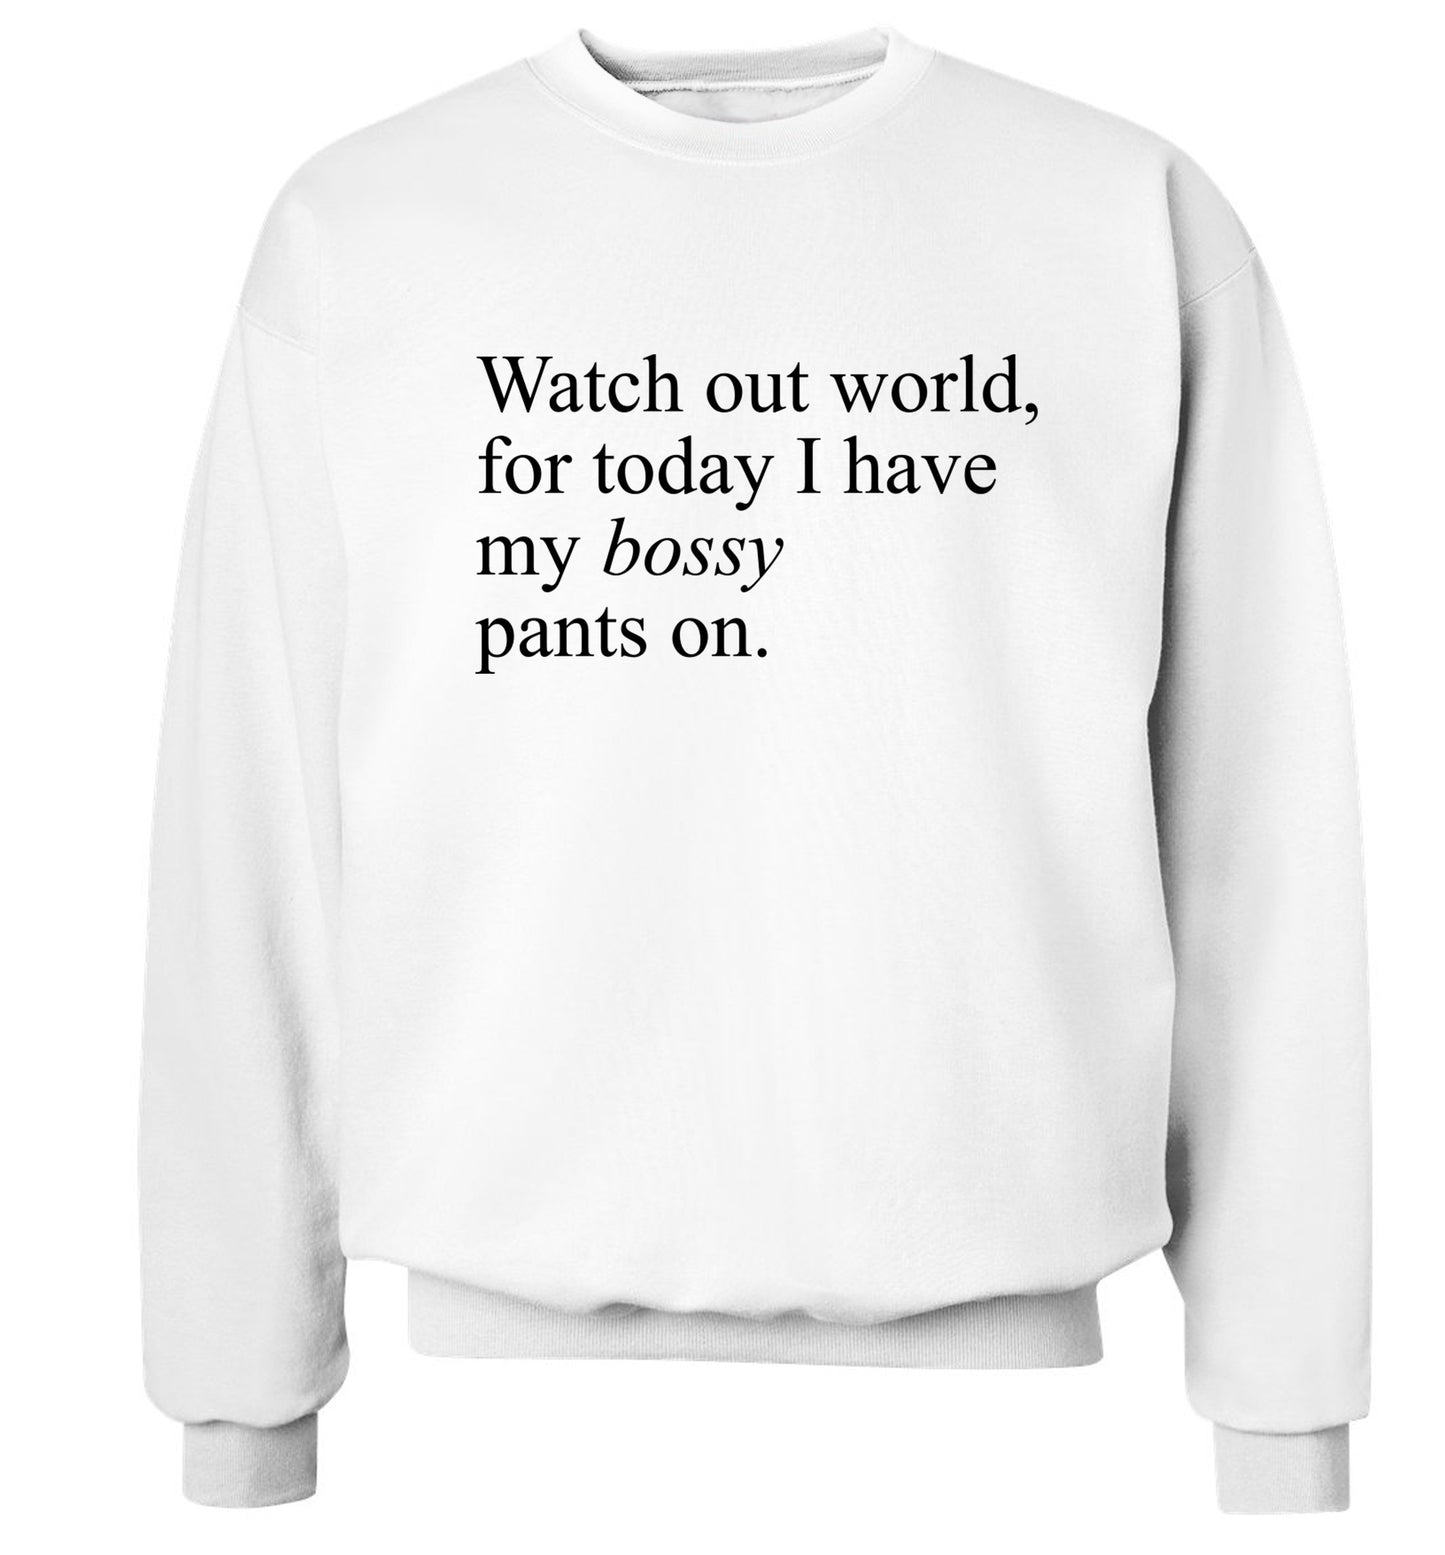 Watch out world, for today I have my bossy pants on Adult's unisex white Sweater 2XL